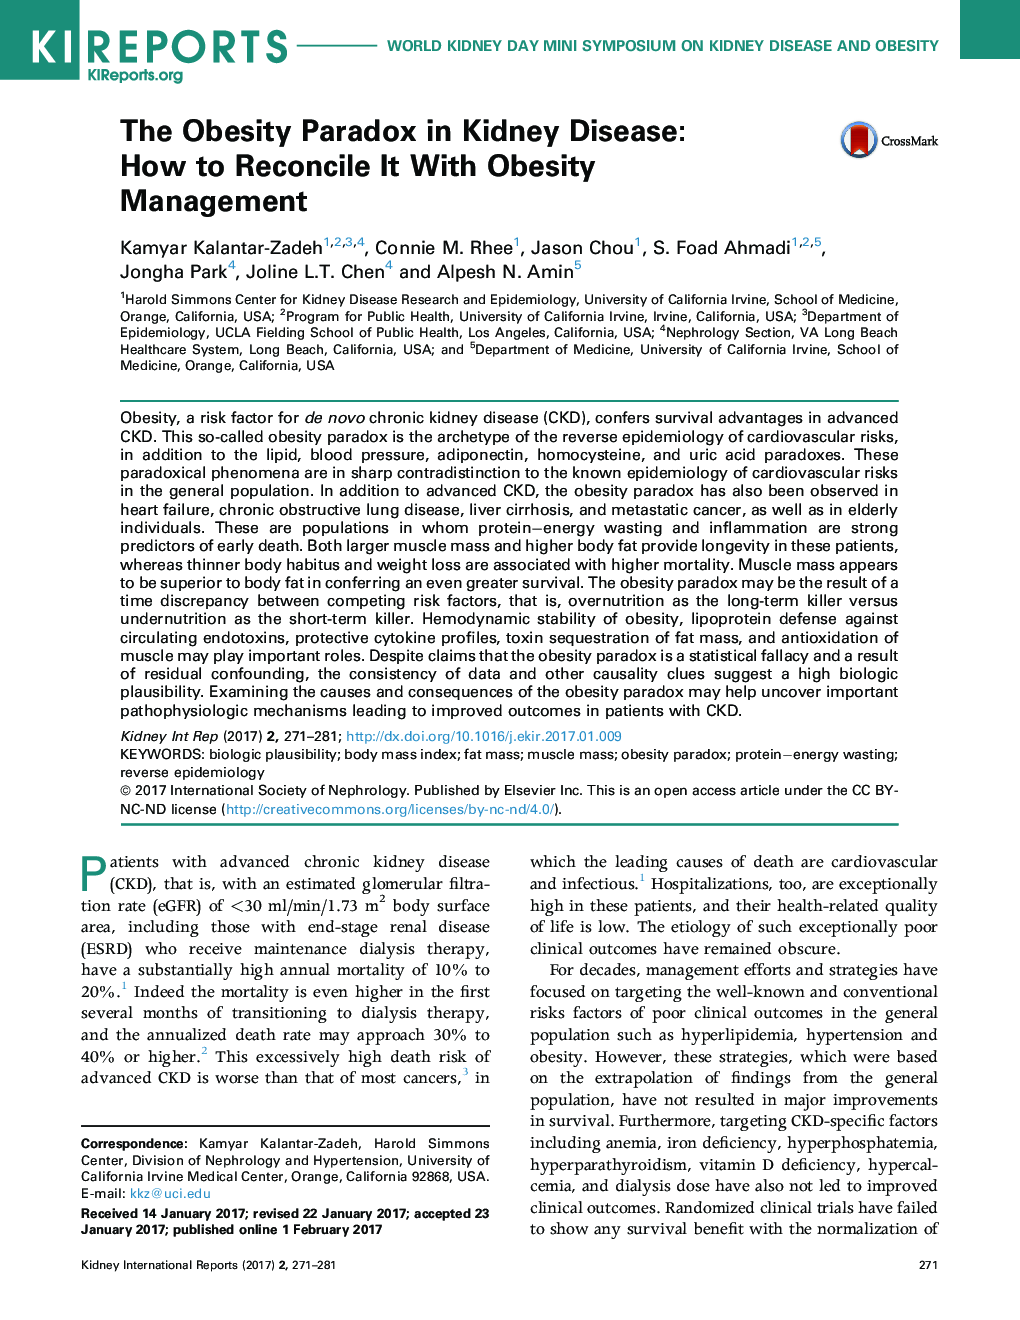 The Obesity Paradox in Kidney Disease: How to Reconcile It With Obesity Management